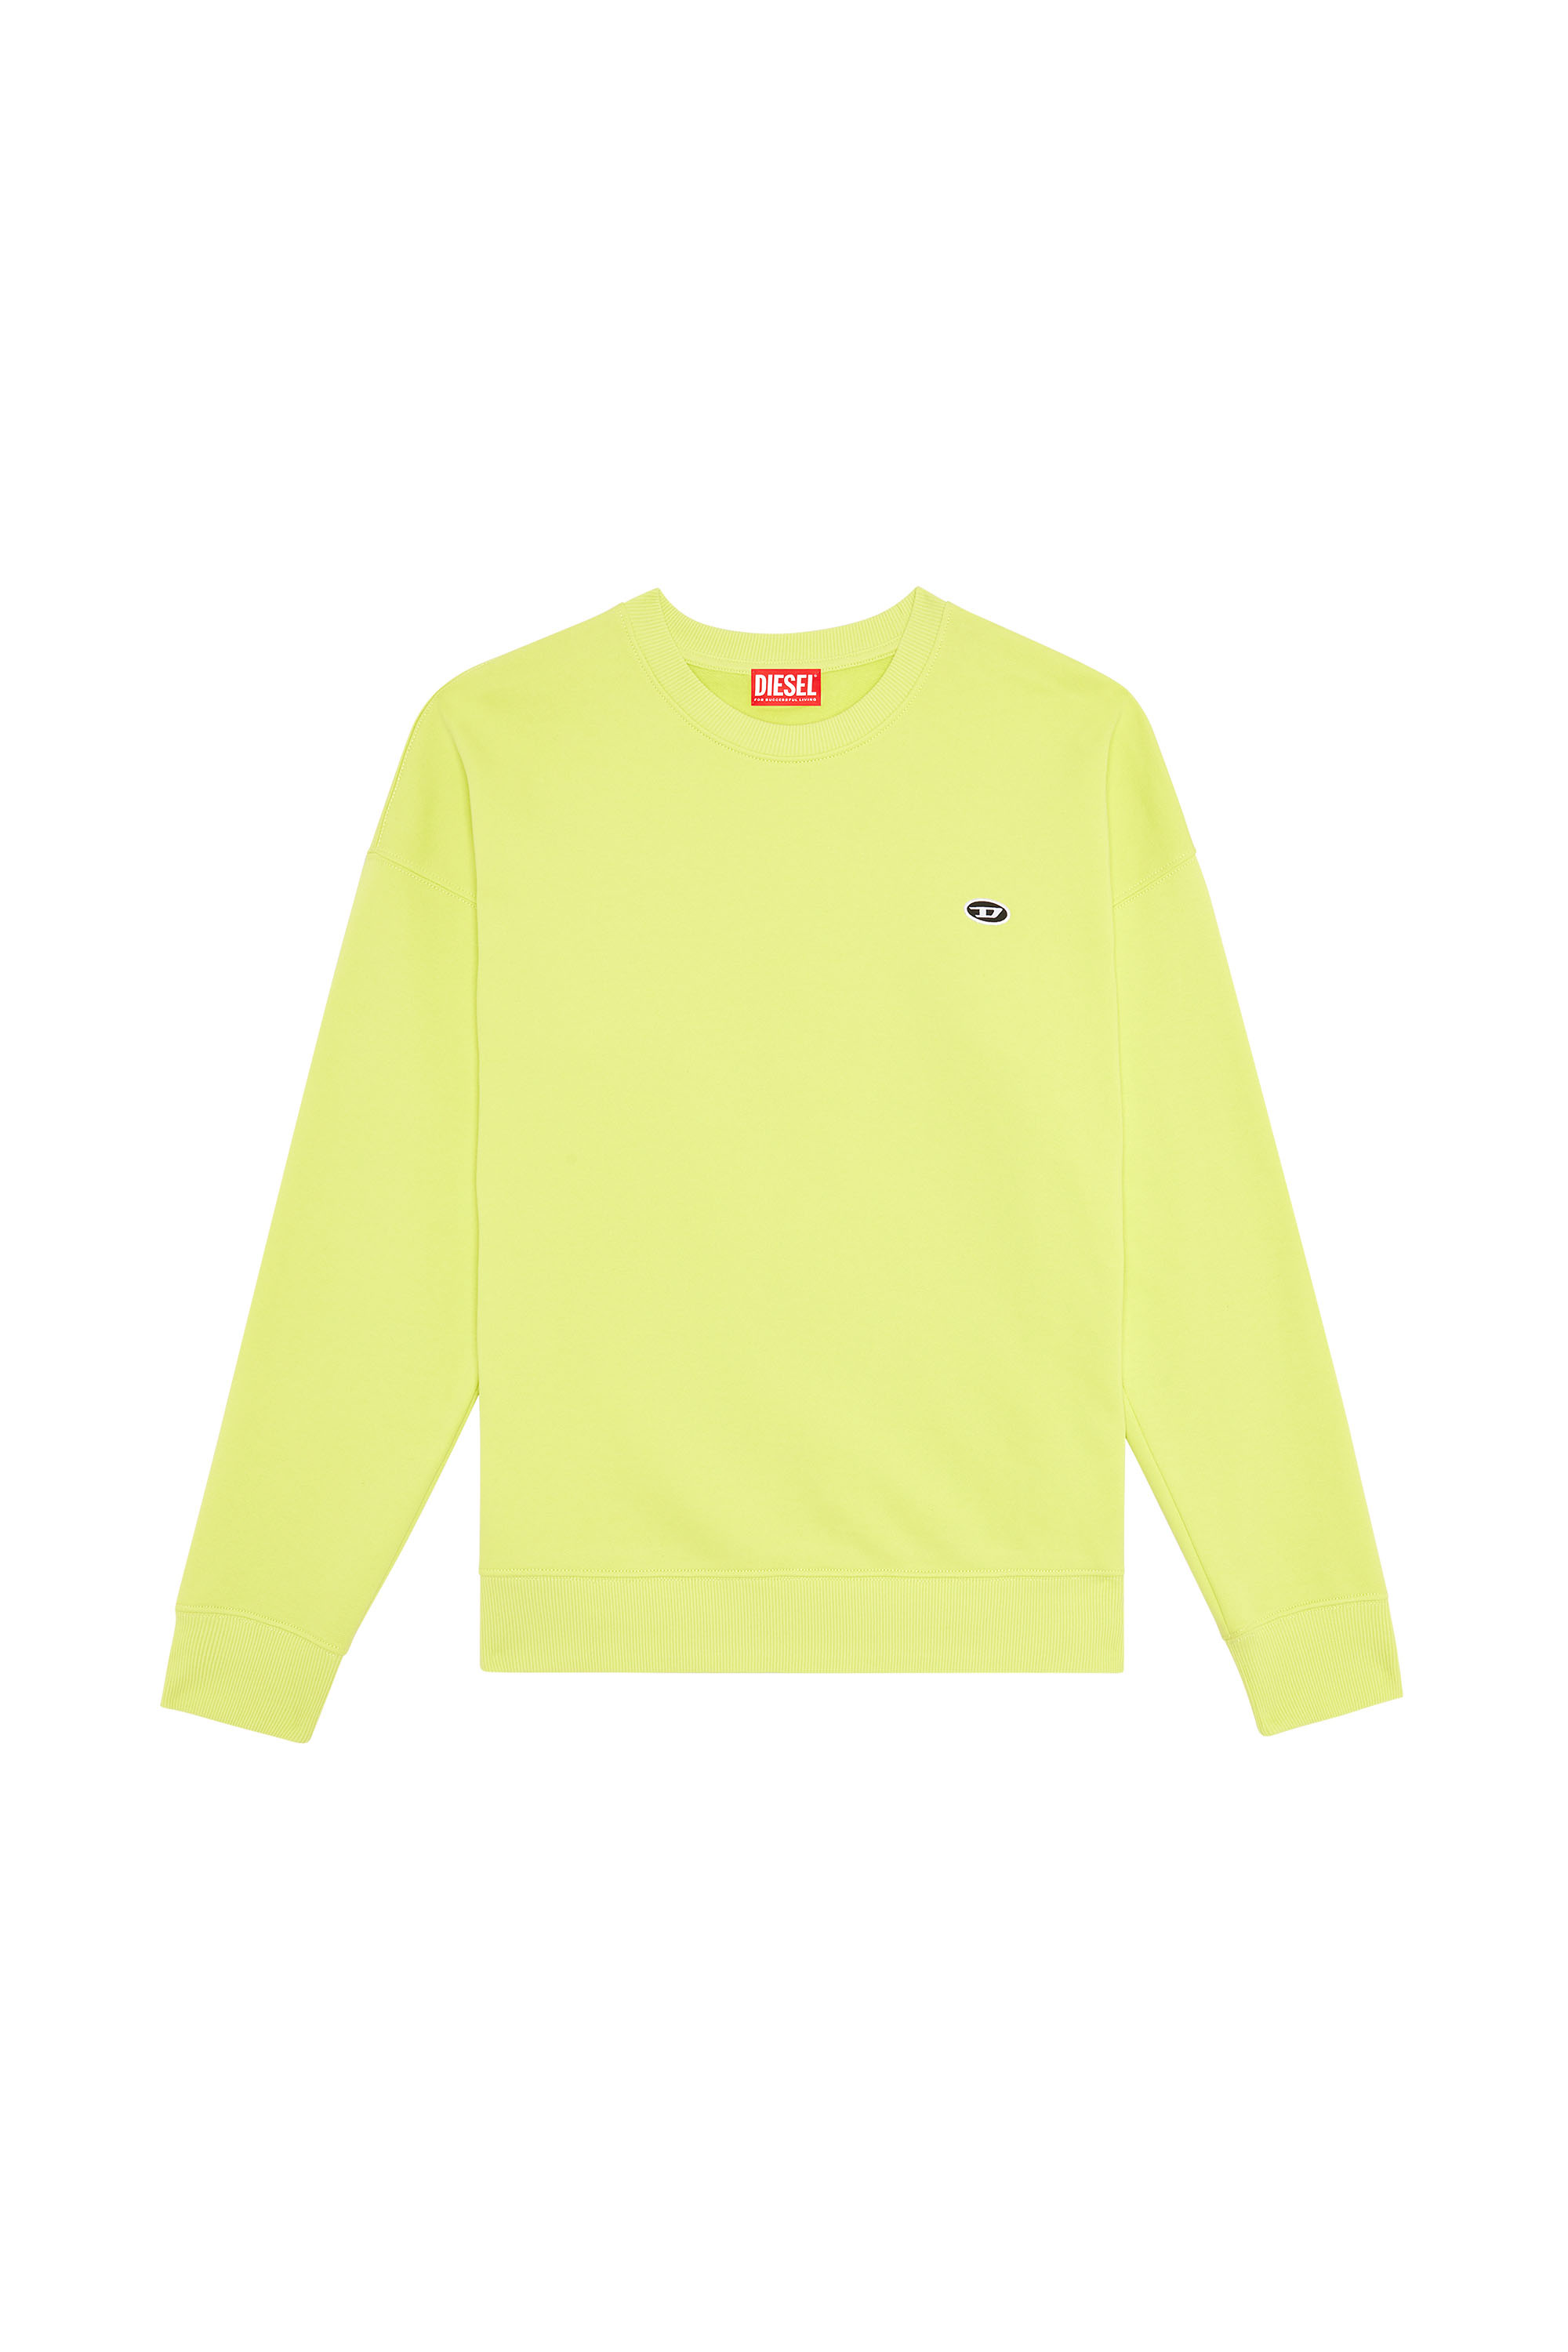 Diesel - S-ROB-DOVAL-PJ, Yellow Fluo - Image 5